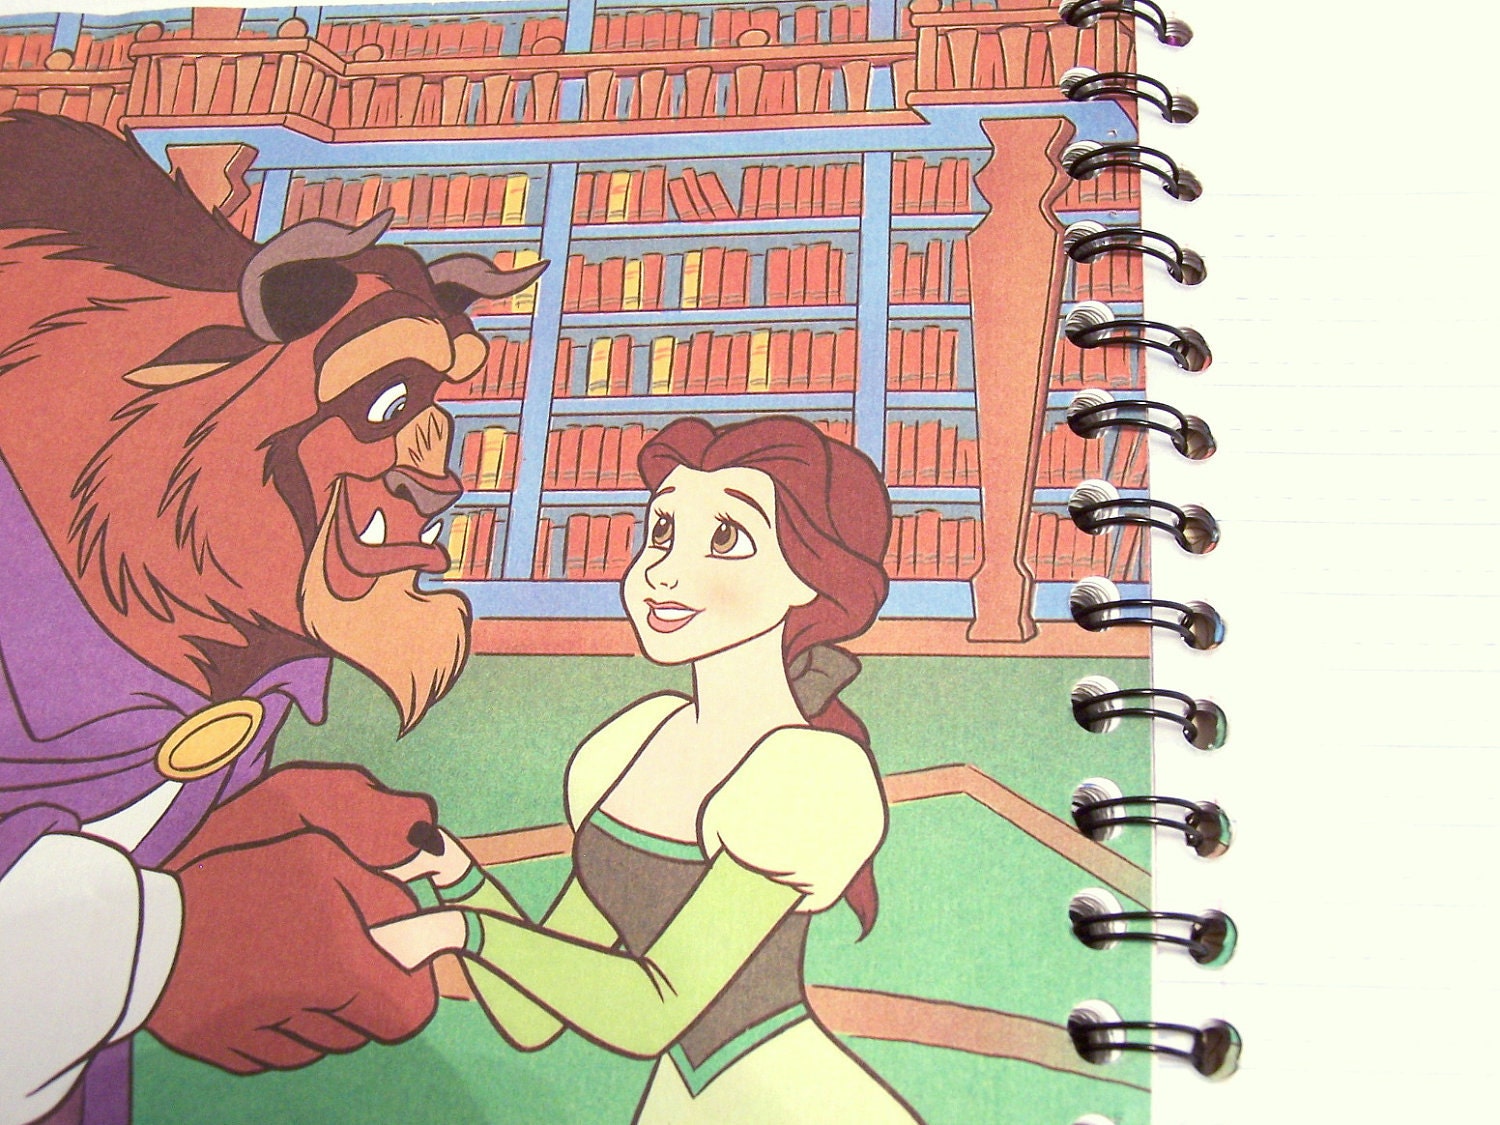 Upcycled Golden Book Notebook Upcycled Children's Notebook: Disney's Beauty and the Beast the Teapot's Tale